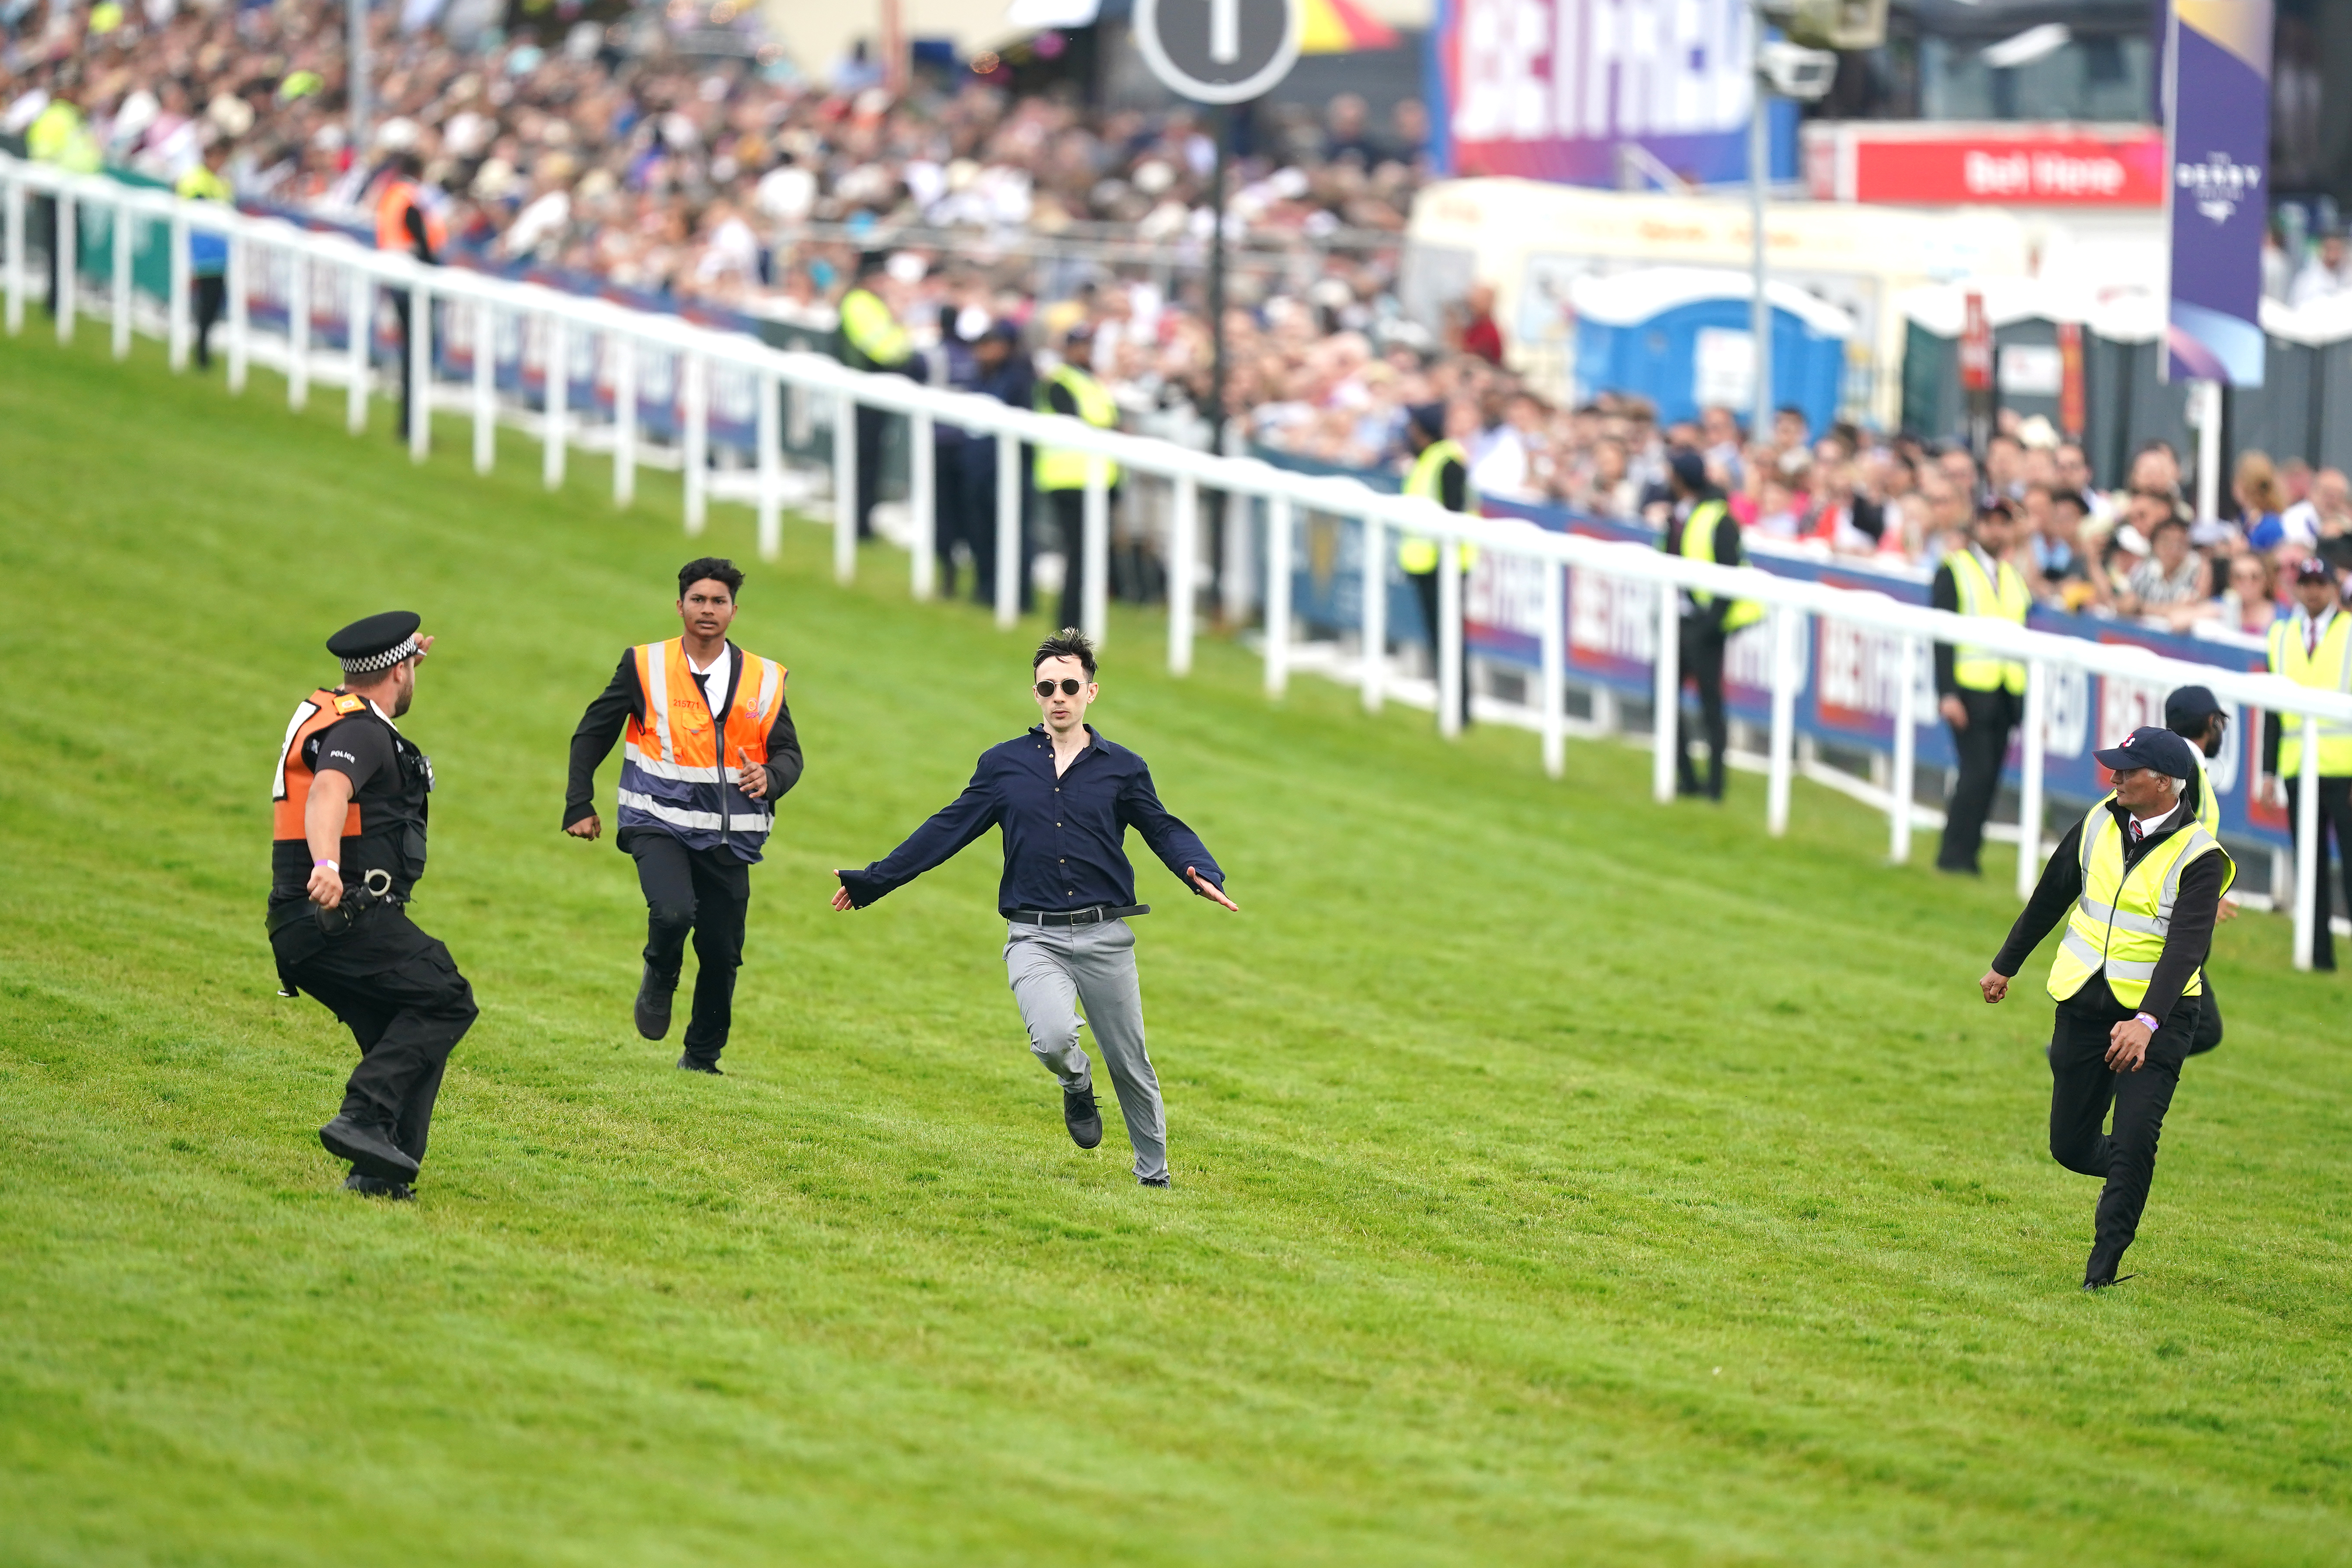 , Protestor sprinting on Epsom Derby racecourse tackled as animal activists’ plot to disrupt race is foiled